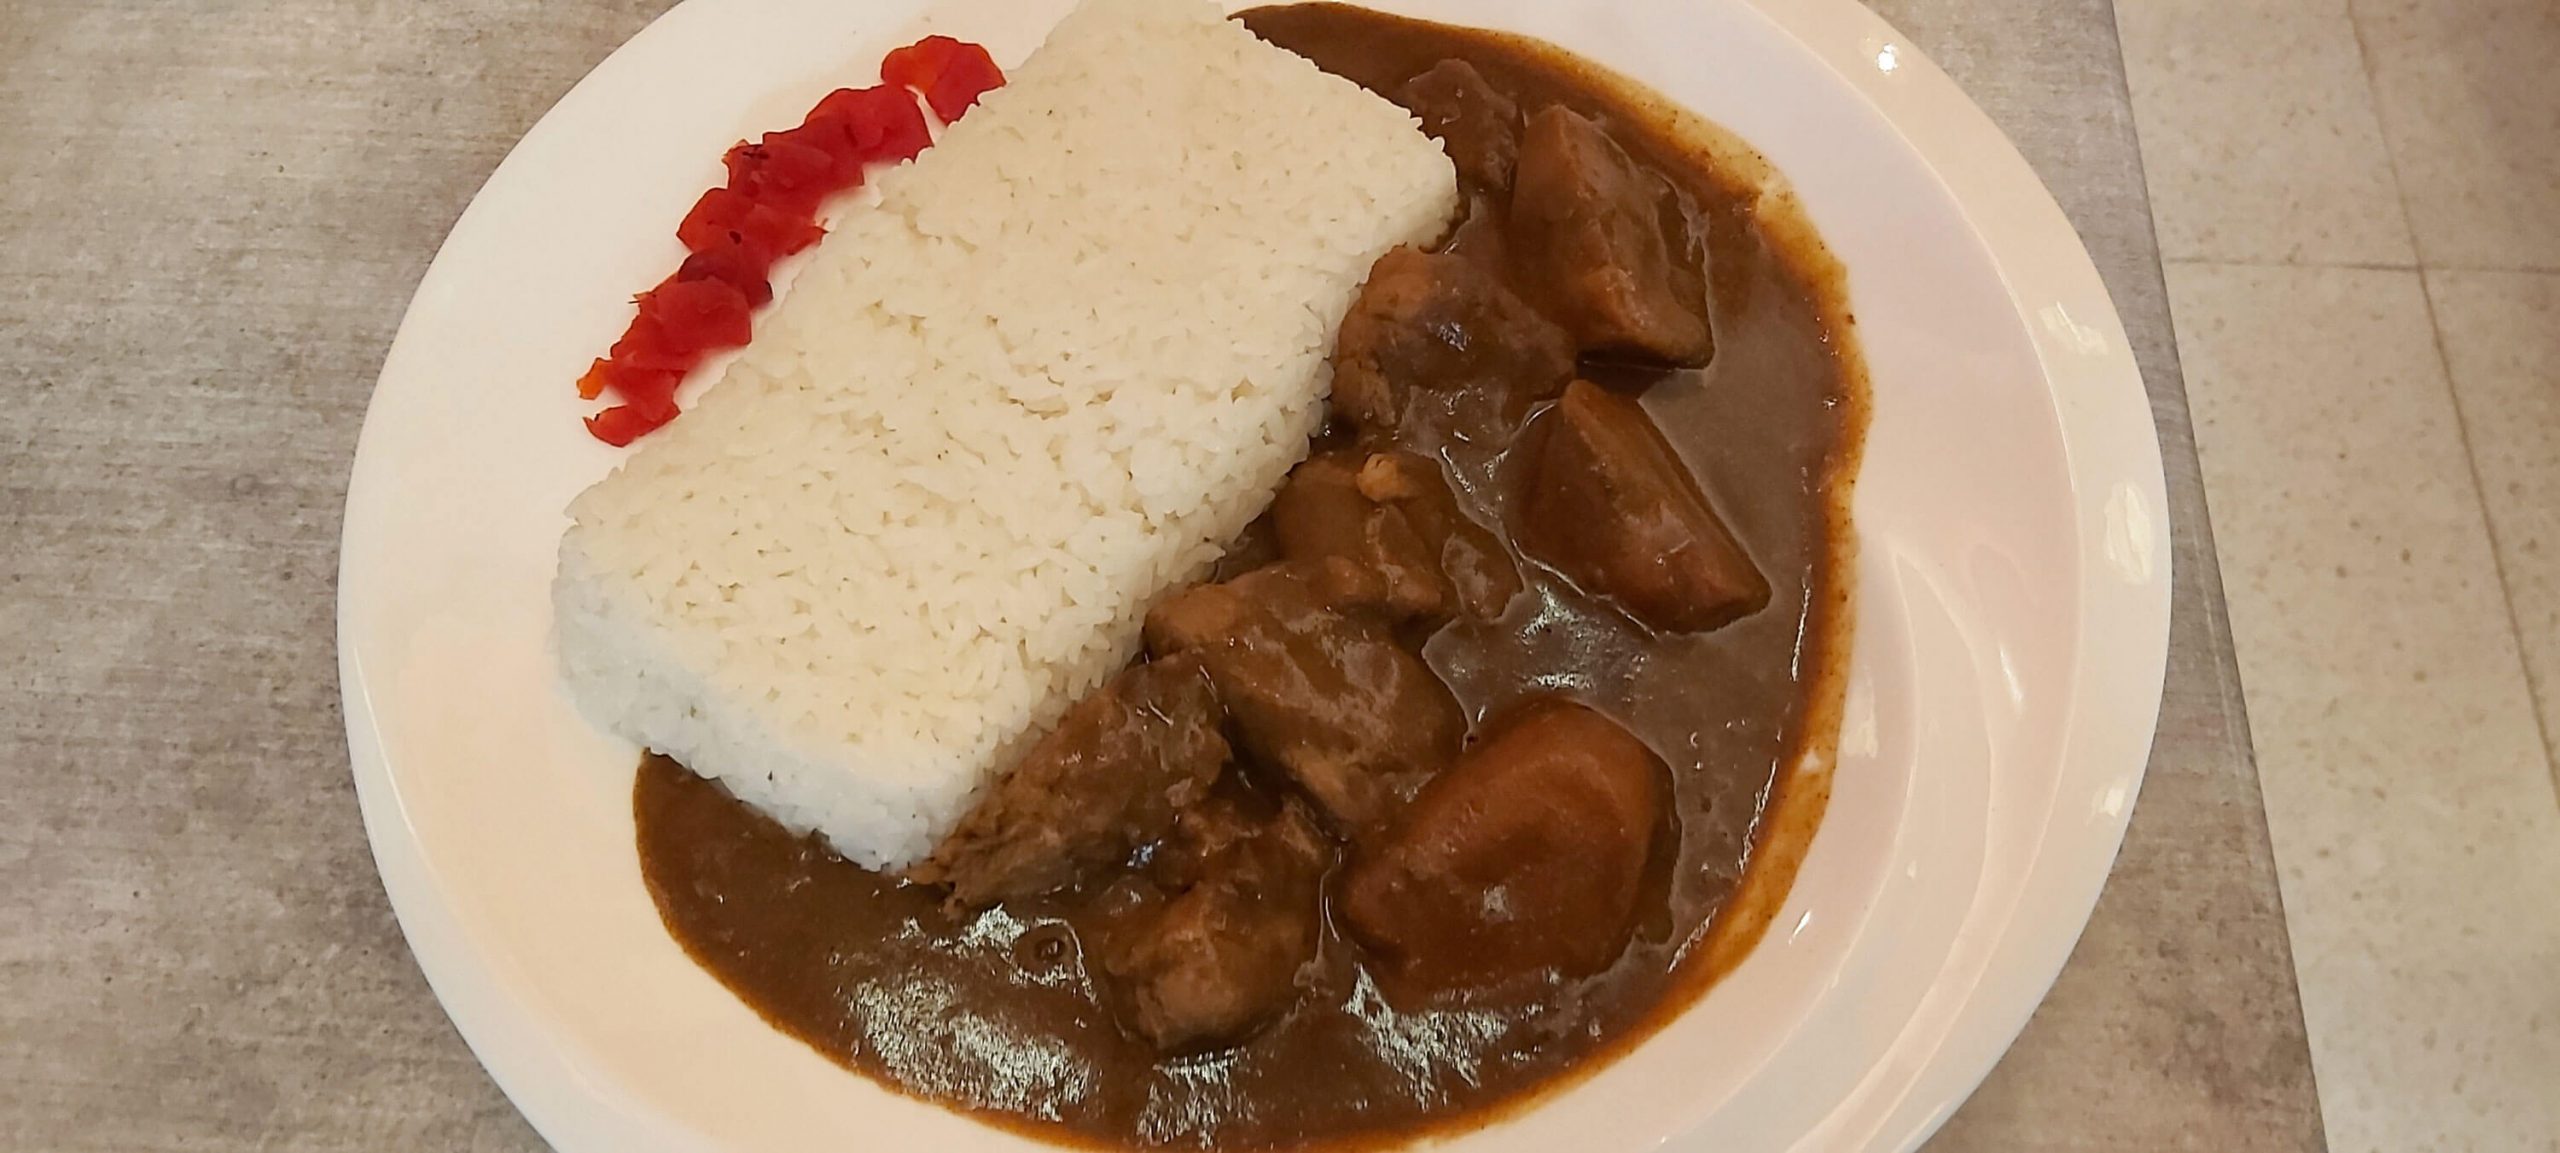 PORK CURRY. Japanese-style curry with slow-braised, tender pork and carrots served with Japanese white rice.